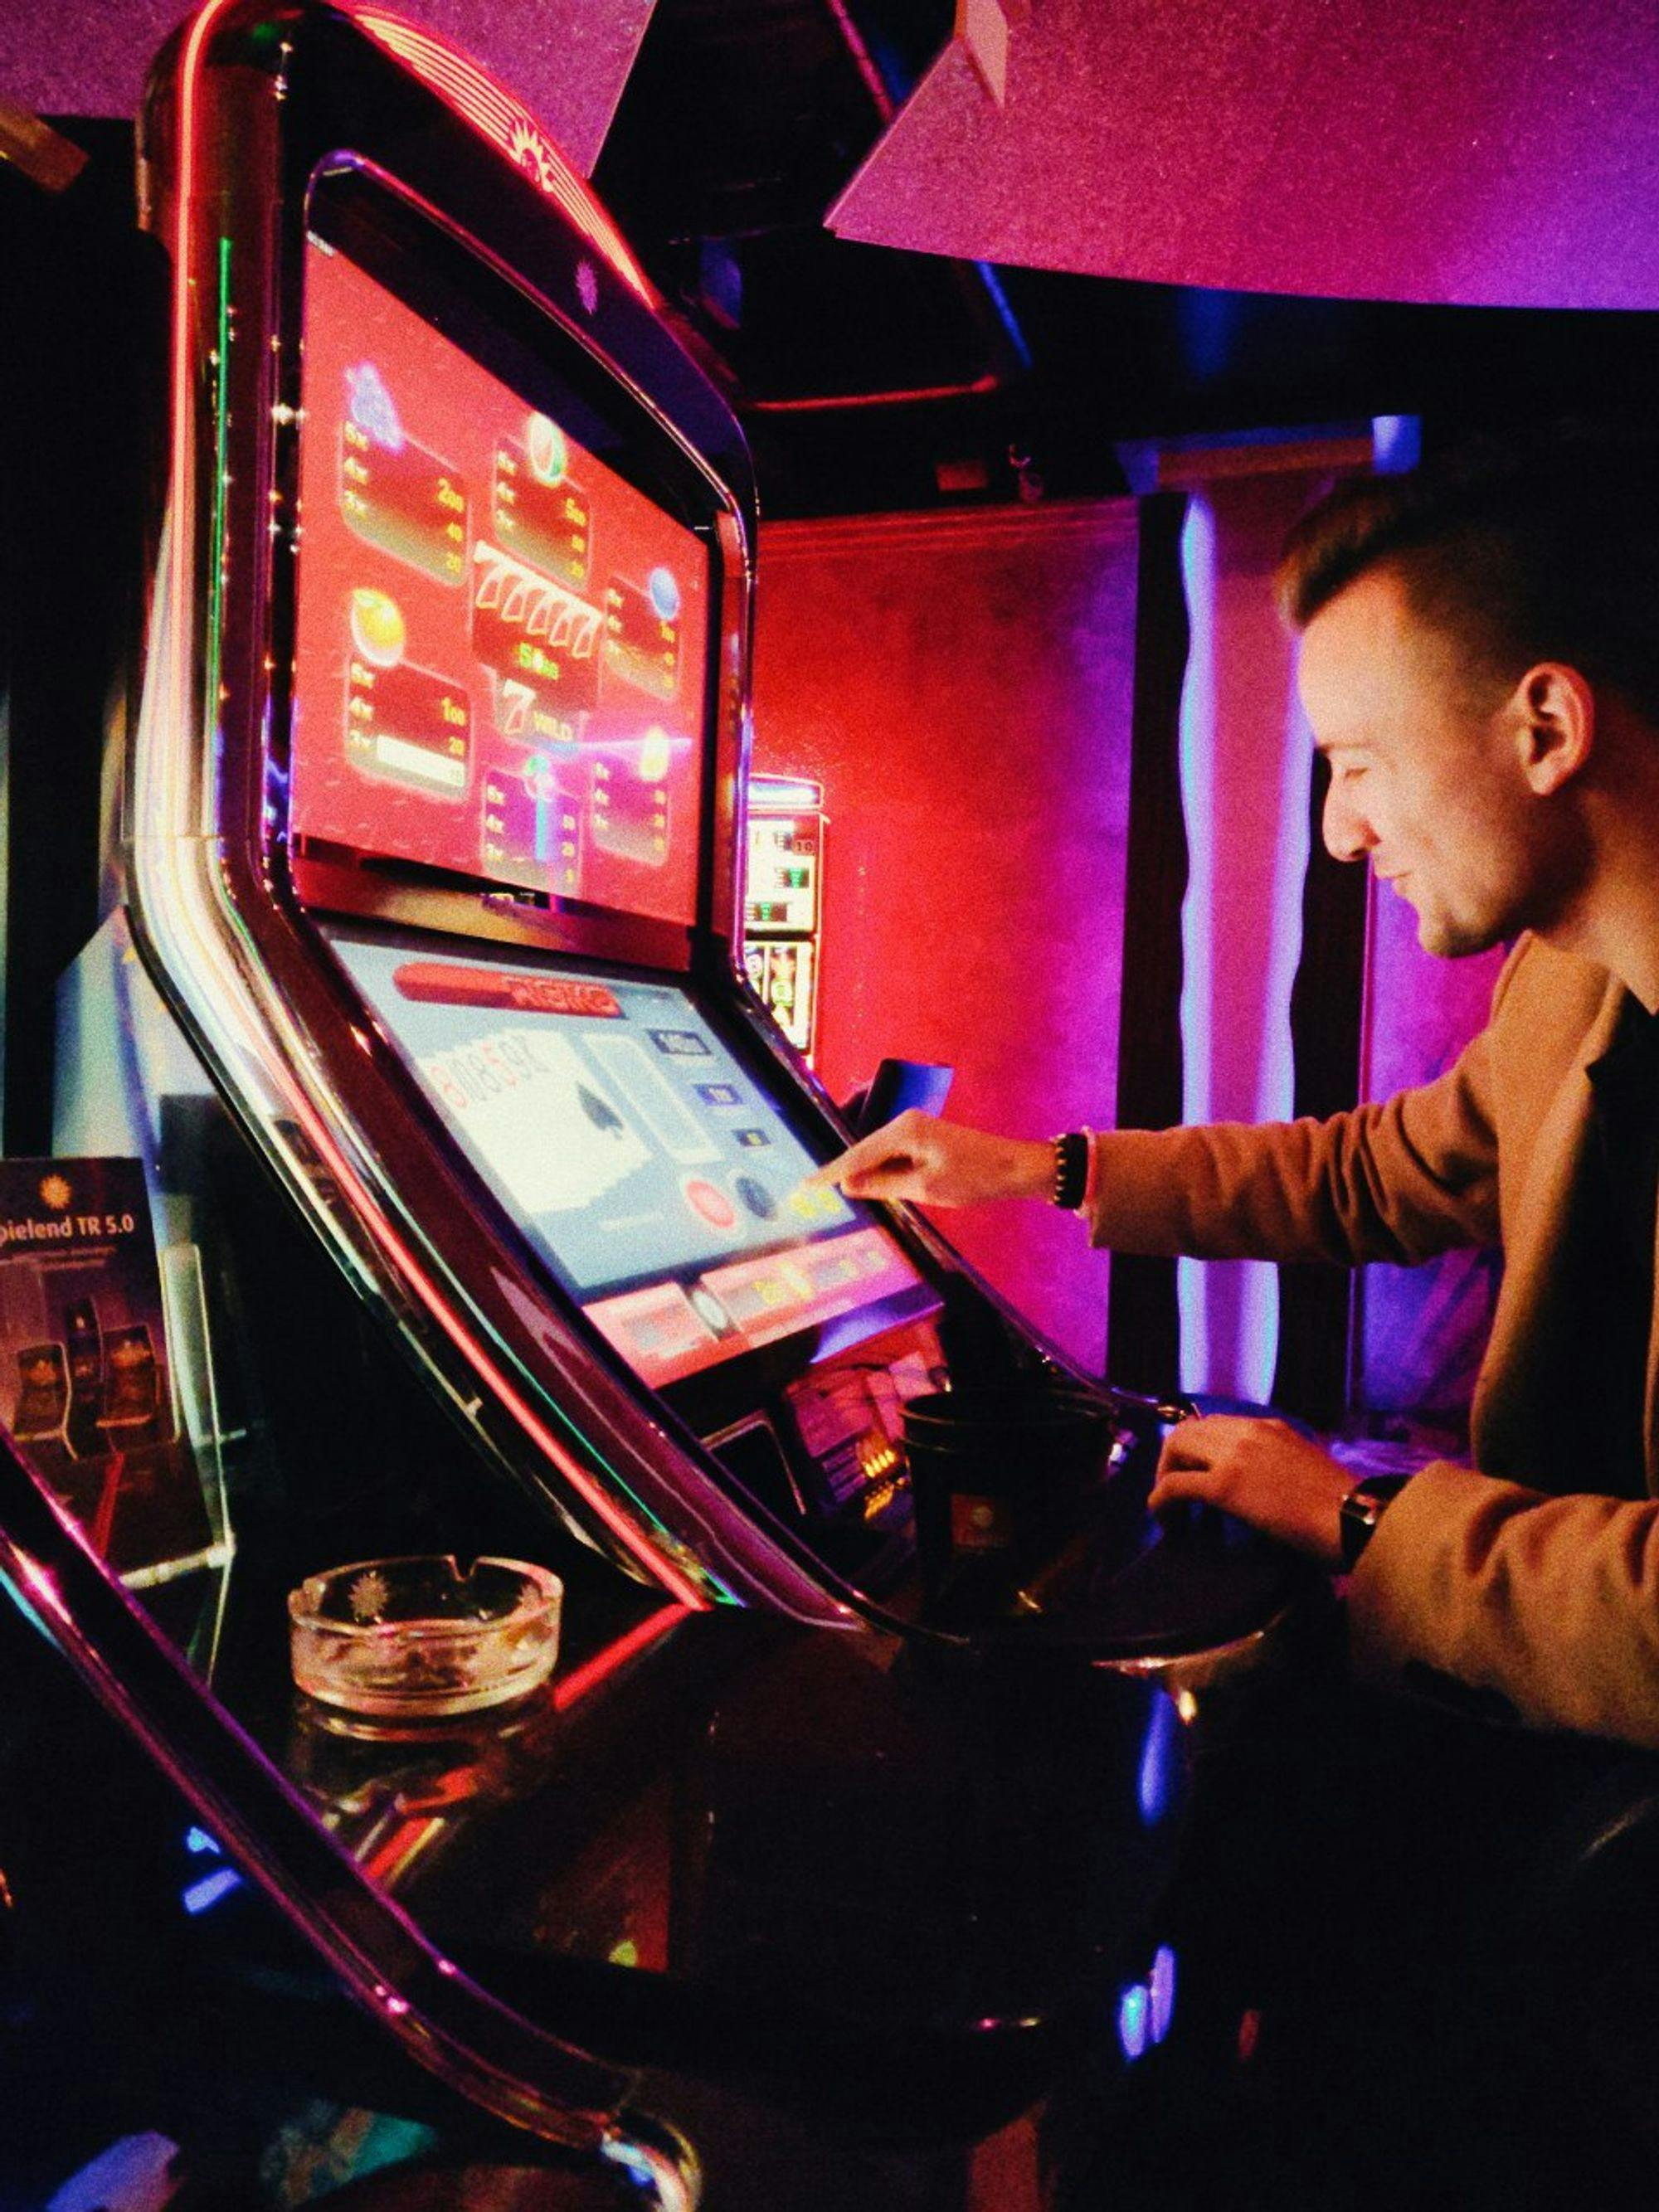 Me playing slot machine in Offenbach, Germany's crime spot Nr. 1